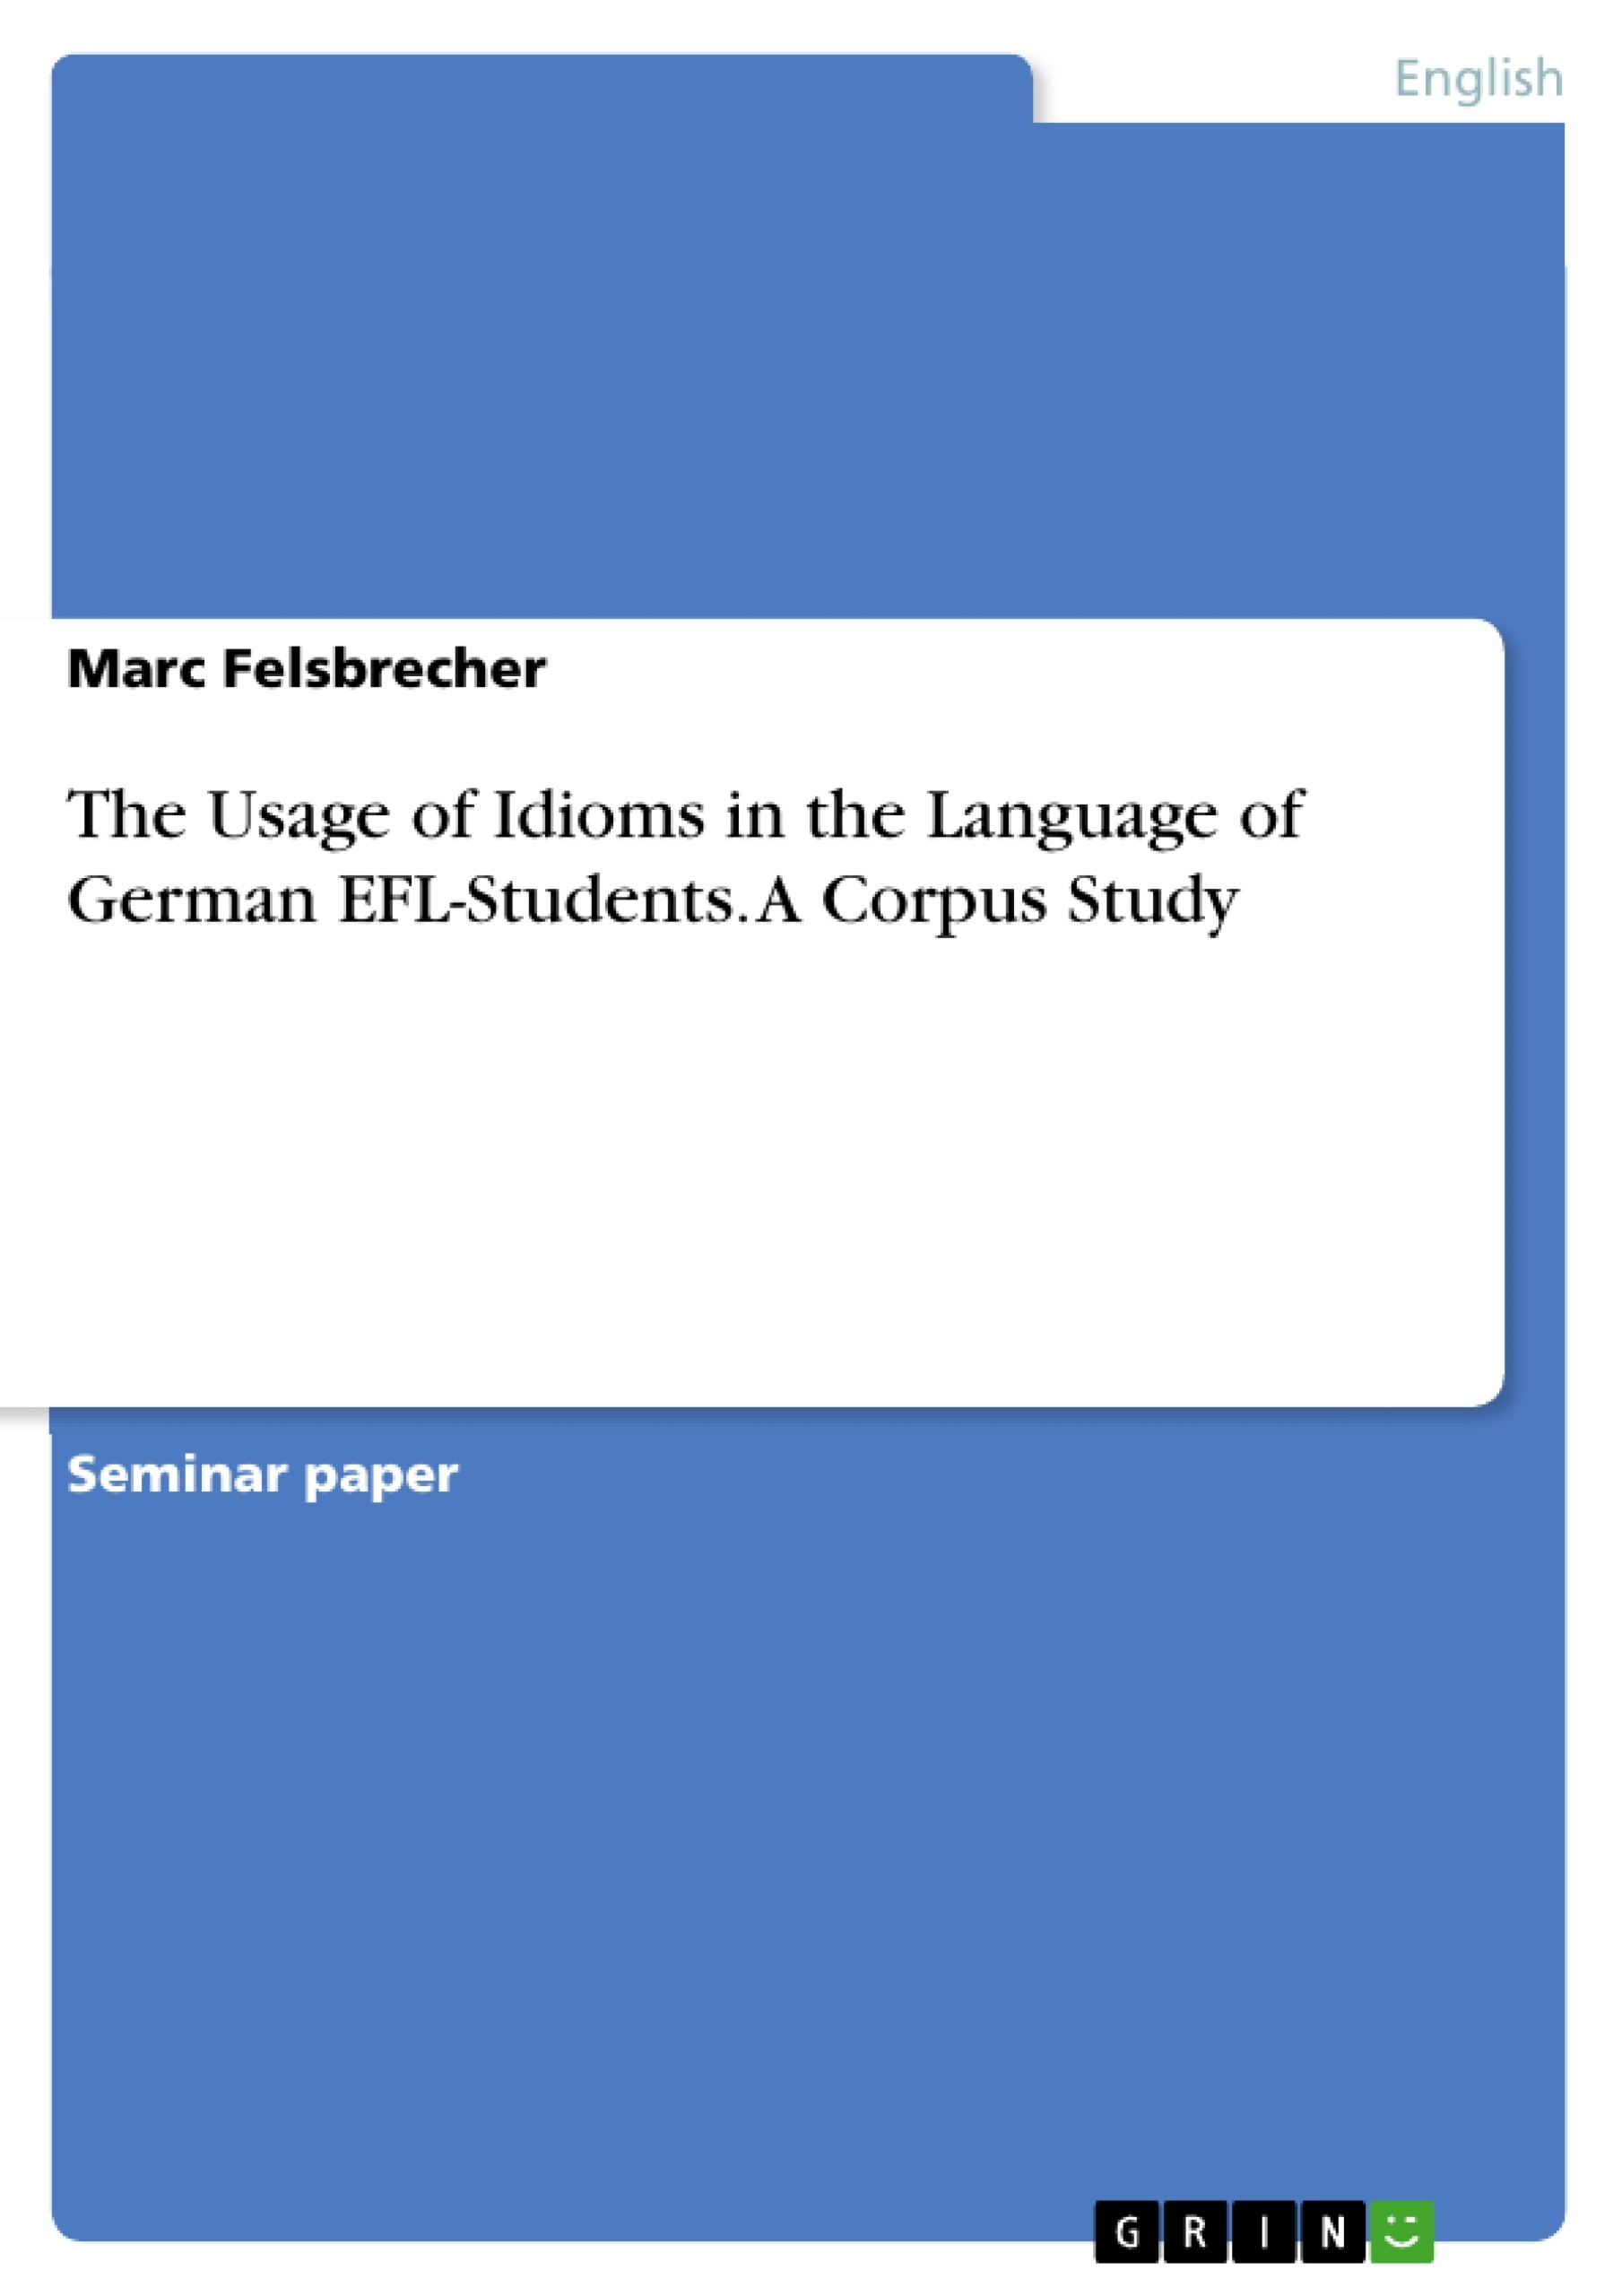 Title: The Usage of Idioms in the Language of German EFL-Students. A Corpus Study